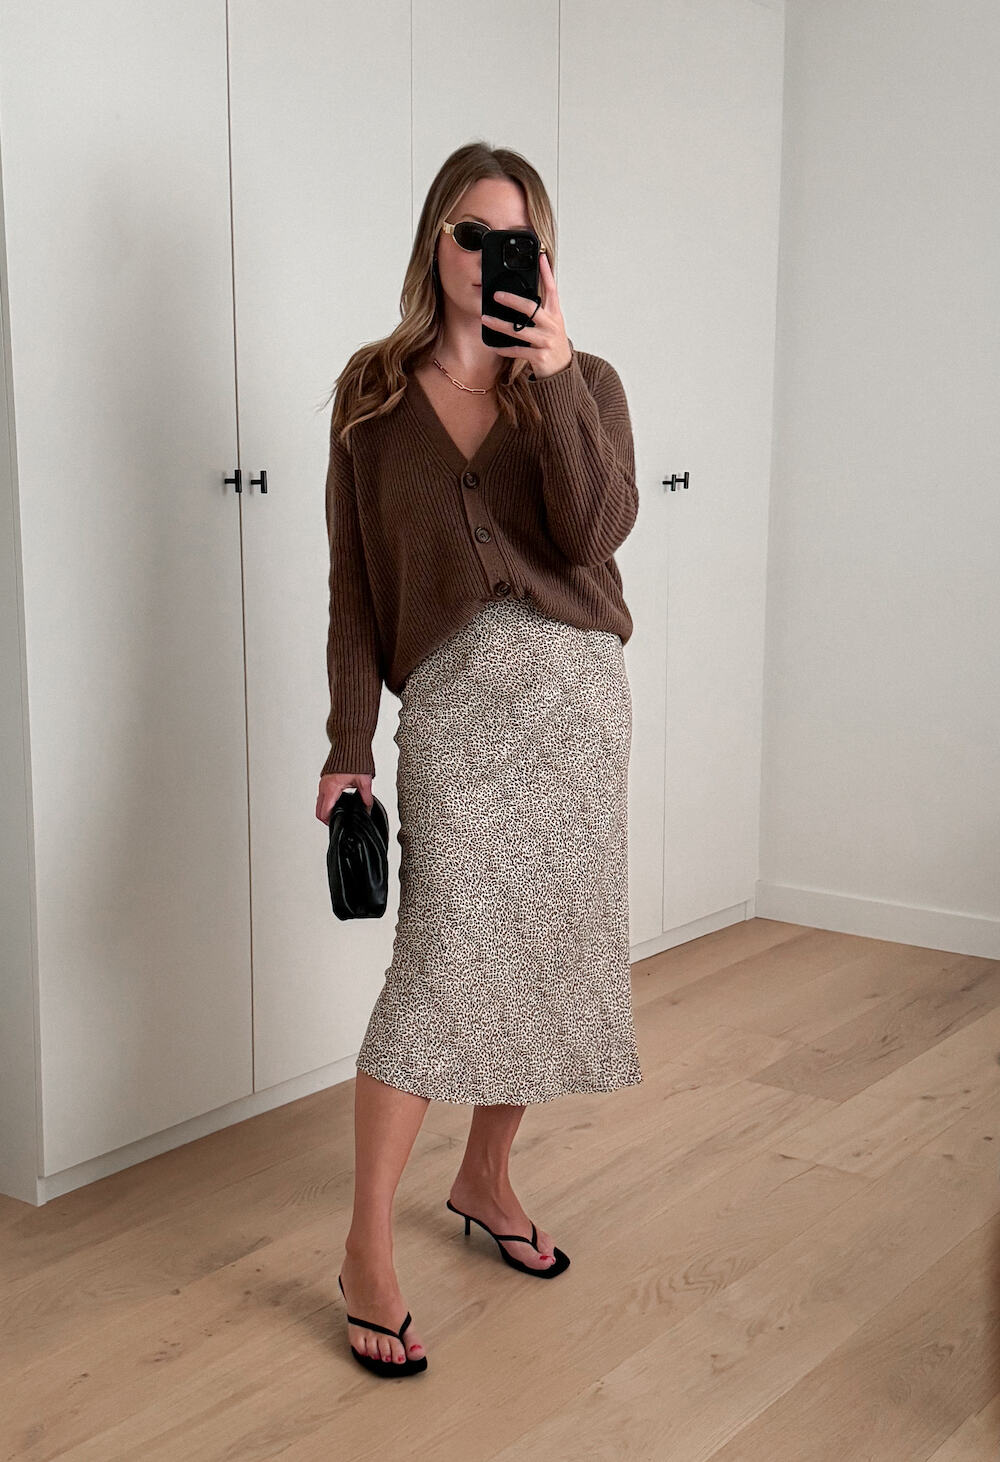 Christal wearing a printed slip skirt with a brown cardigan and black accessories.